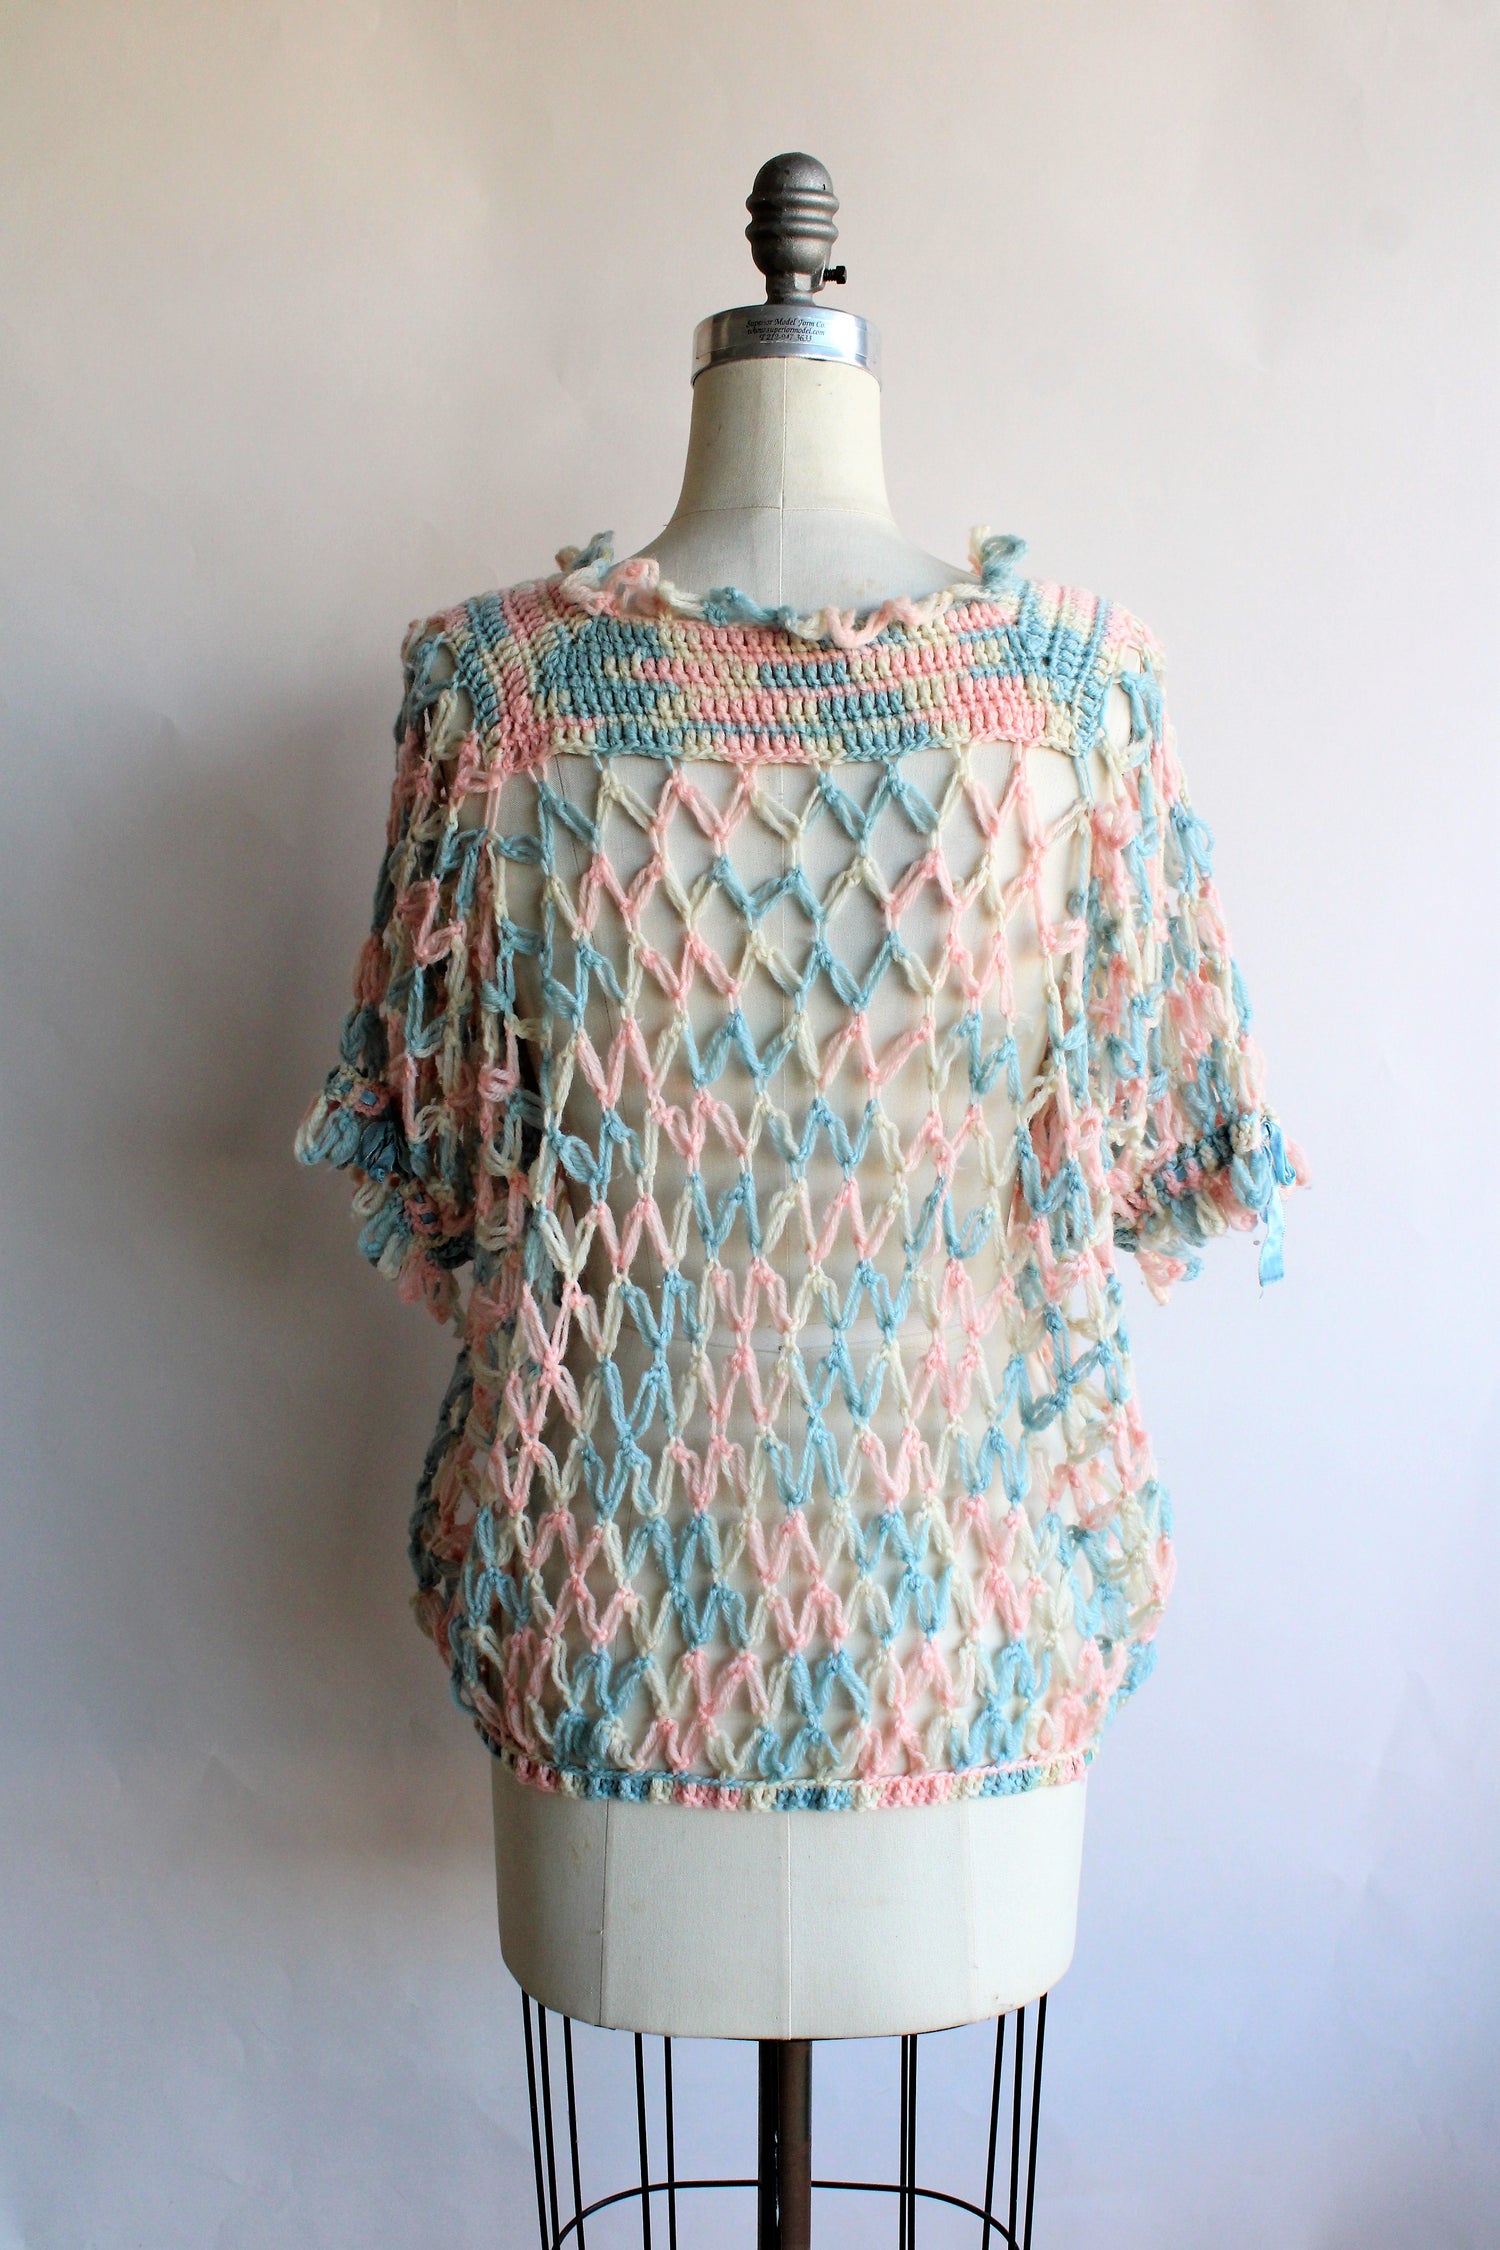 Vintage 1950s Knit Bed Jacket in Pastel Blue, Pink and White